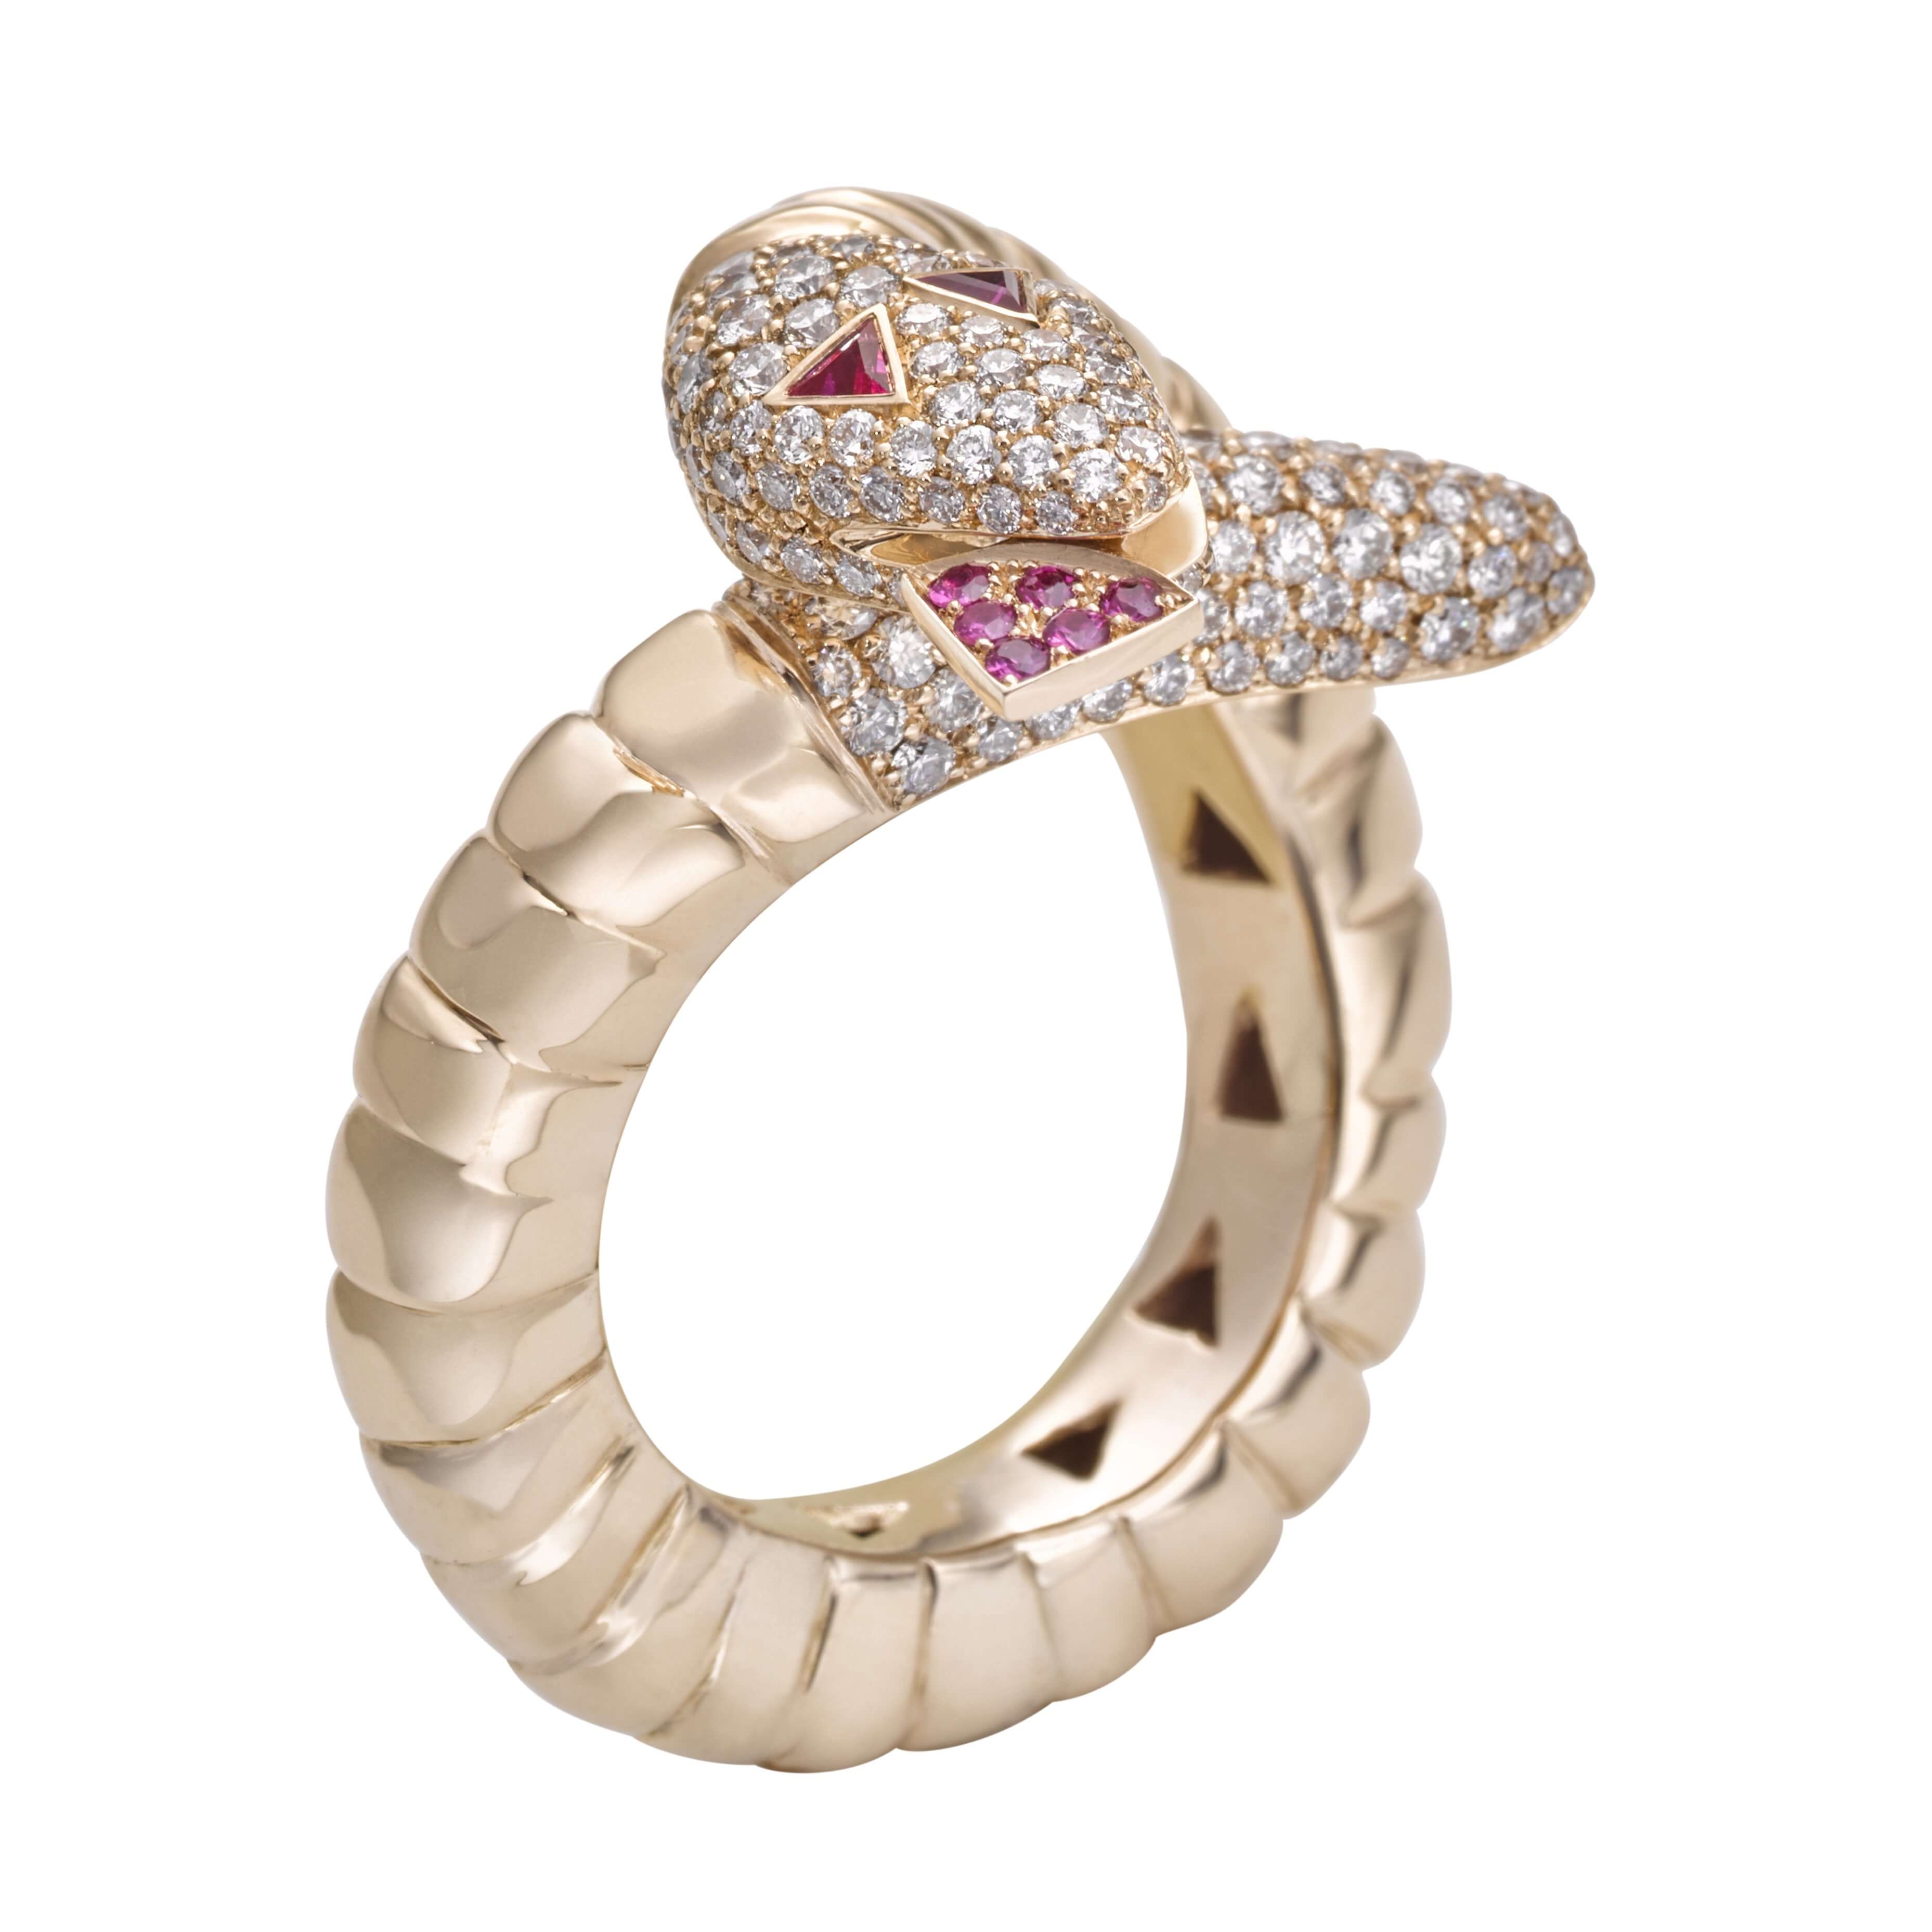 Rose Gold Snake Ring with diamonds and rubies